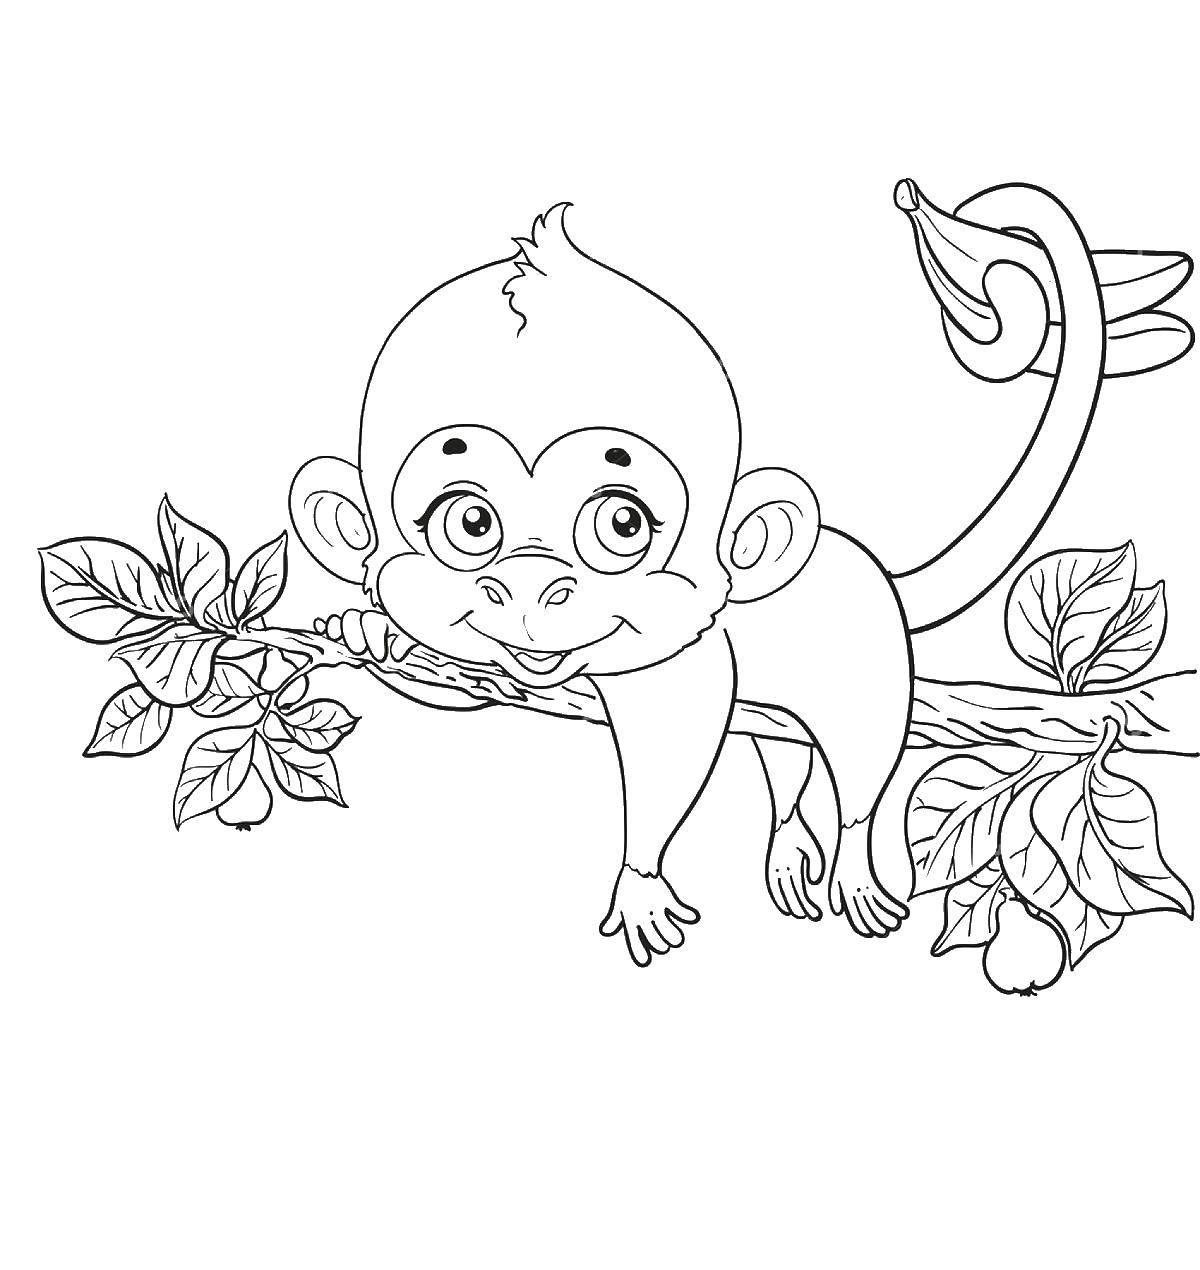 Coloring Monkey on the tree. Category APE. Tags:  APE.